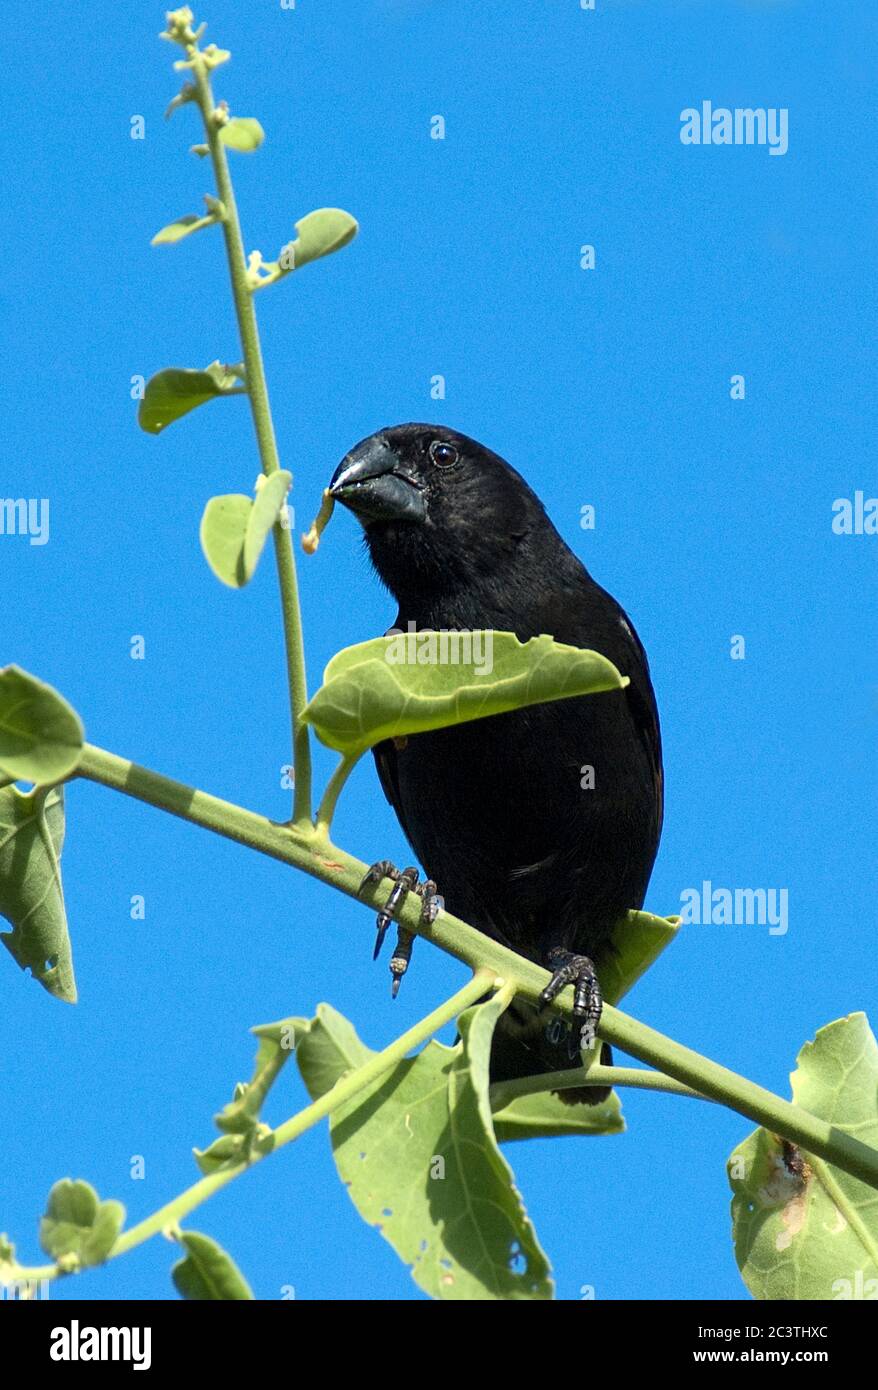 medium ground finch (Geospiza fortis), male perched on a branch, Ecuador, Galapagos Islands Stock Photo